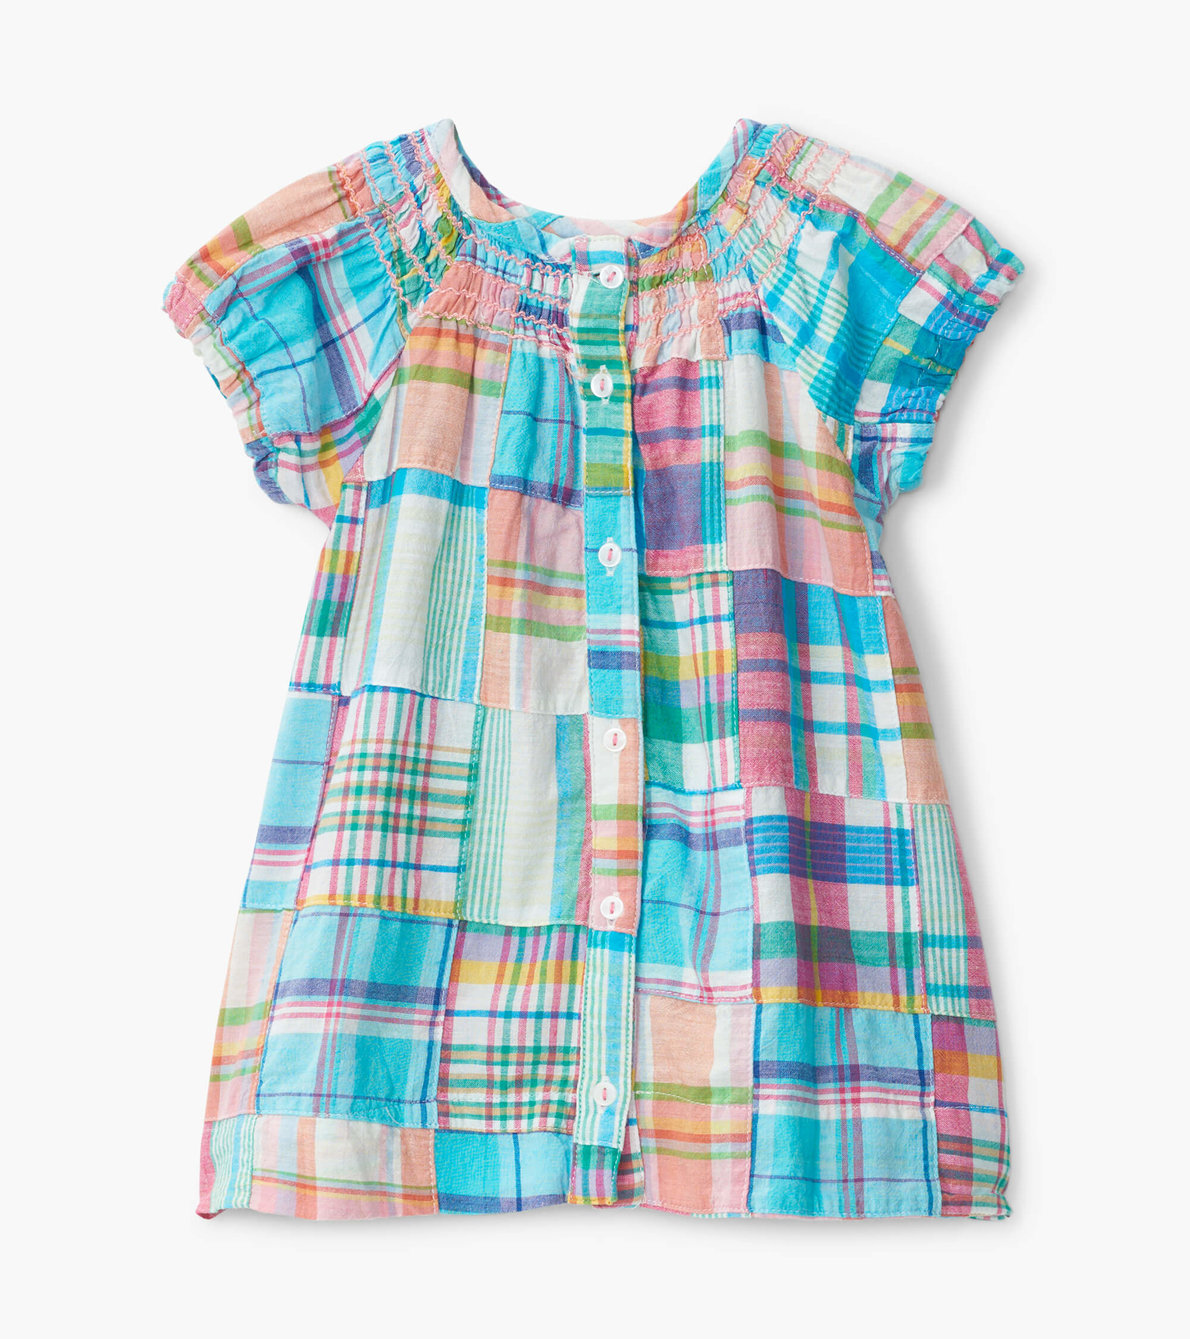 View larger image of Madras Plaid Baby Smocked Dress